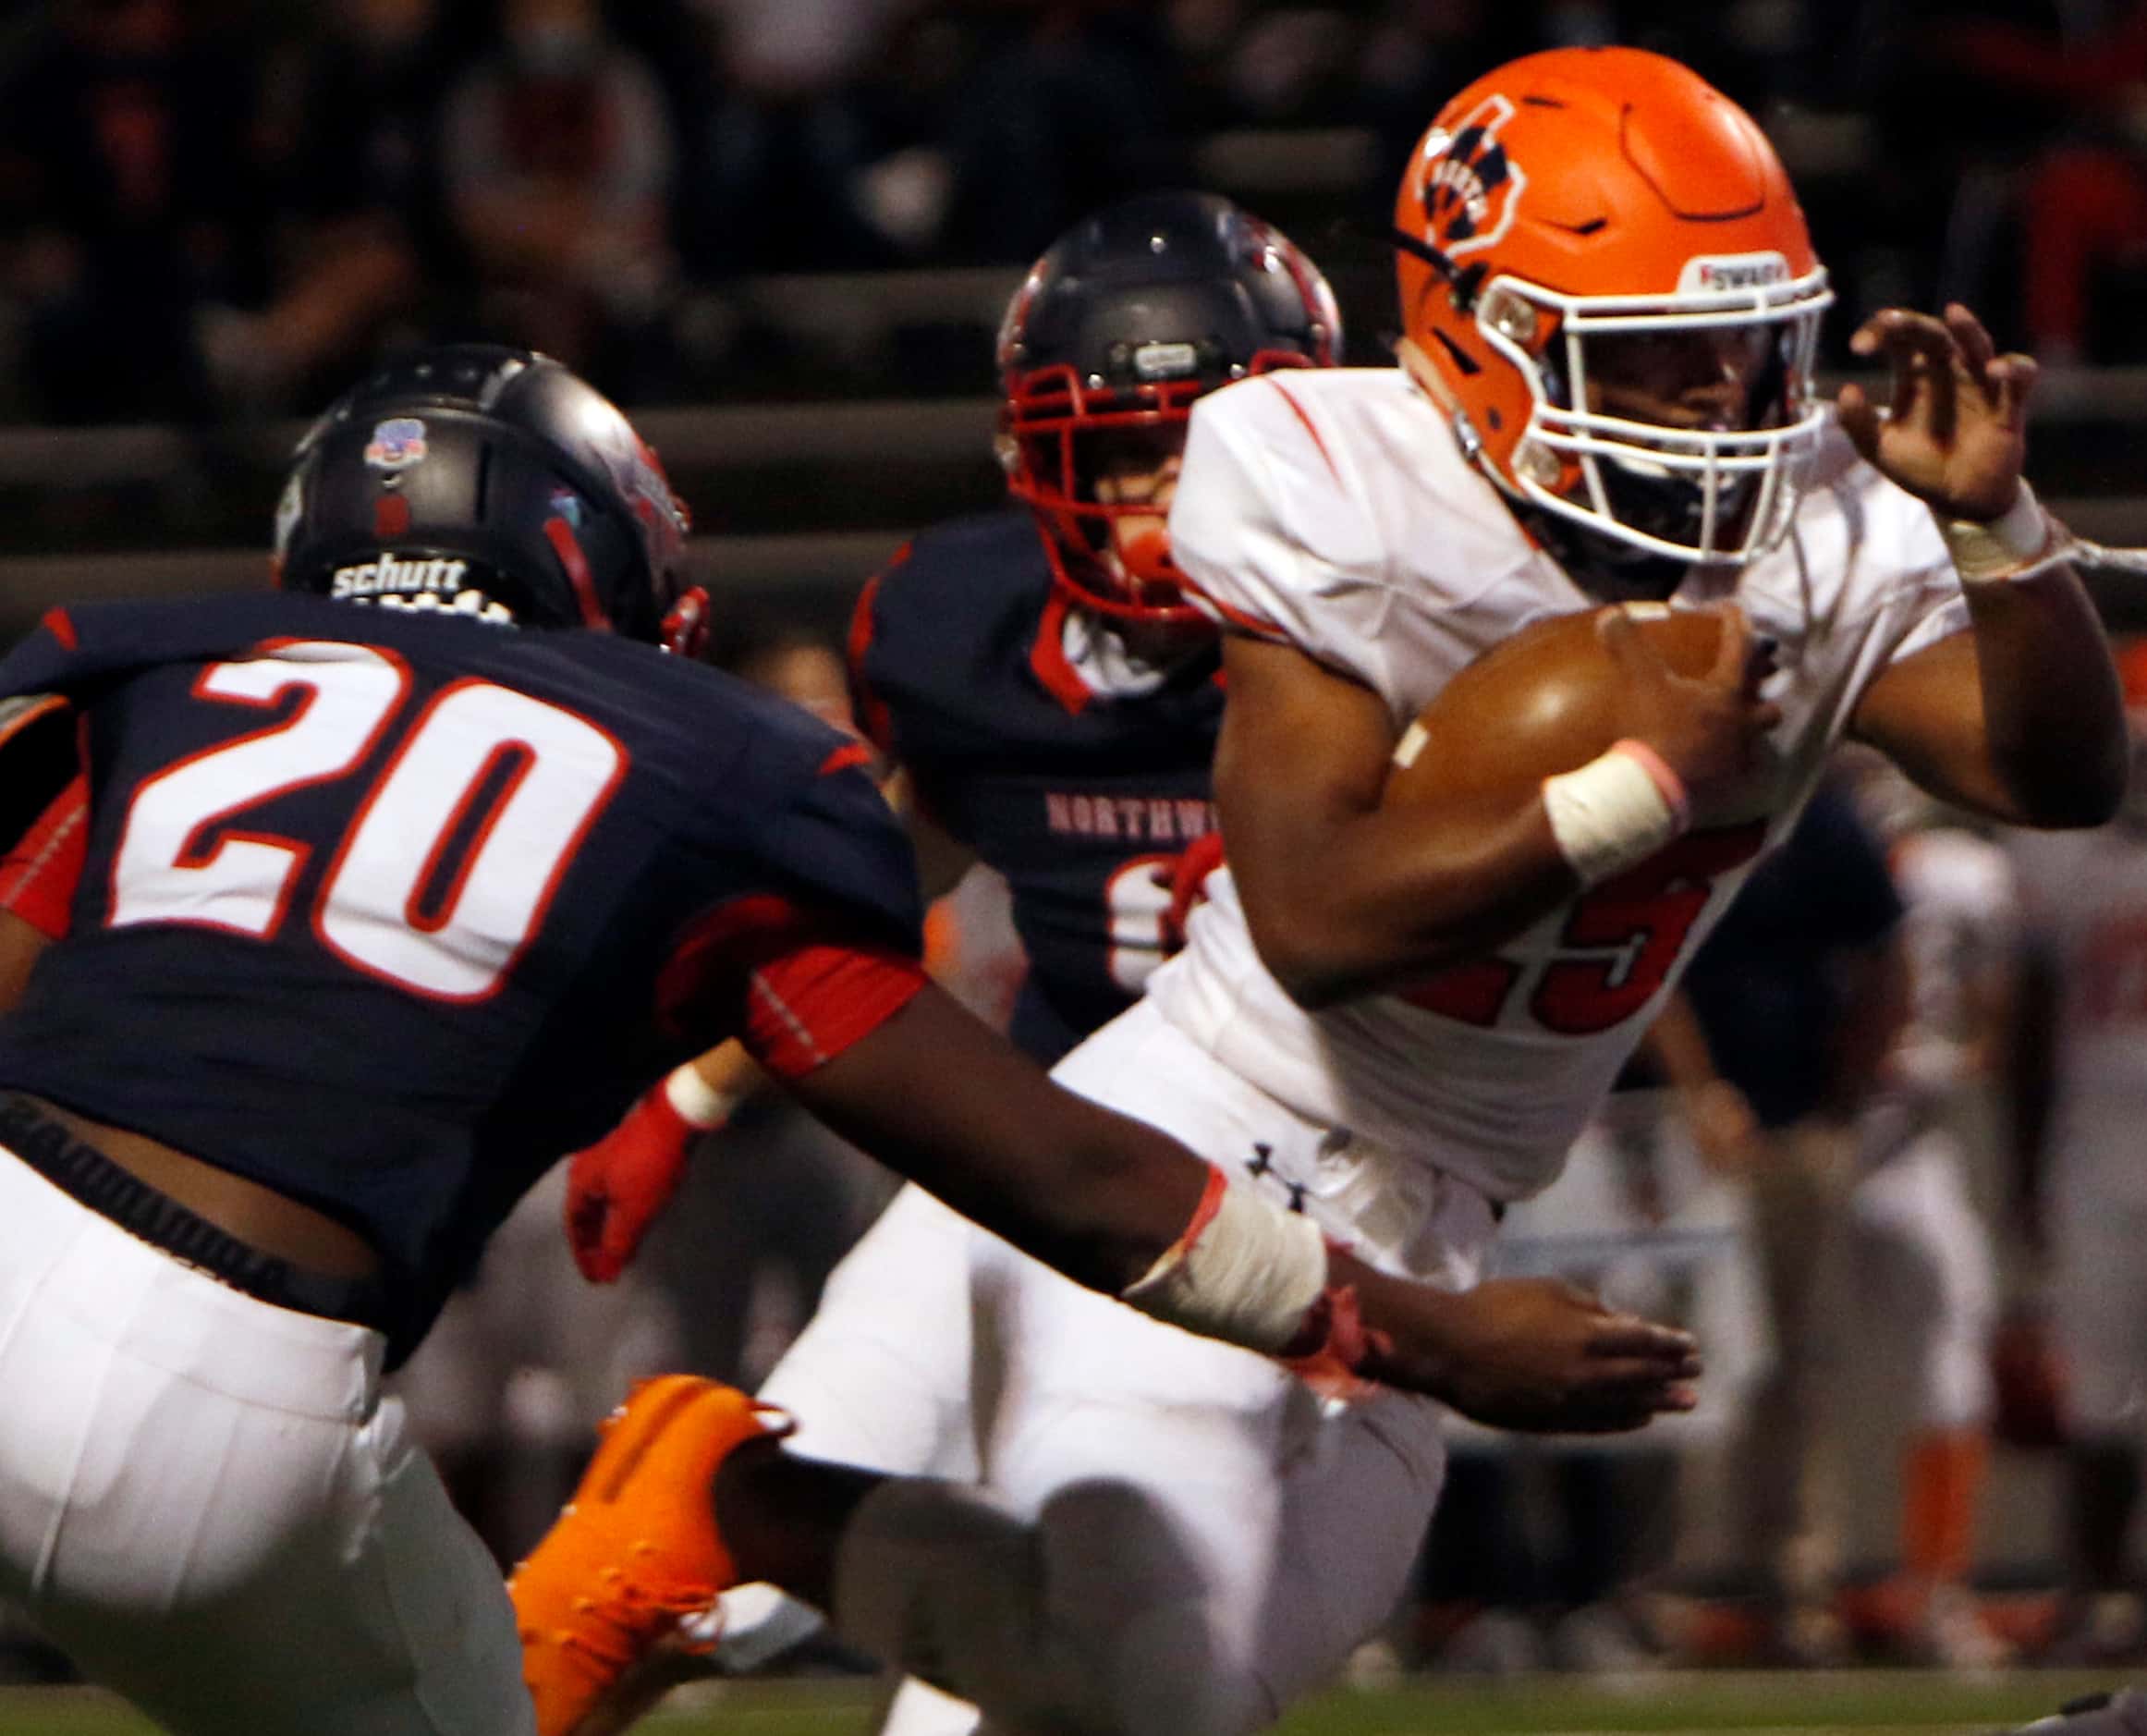 McKinney North running back Jayden Smith (25) drives for a couple of tough yards near the...